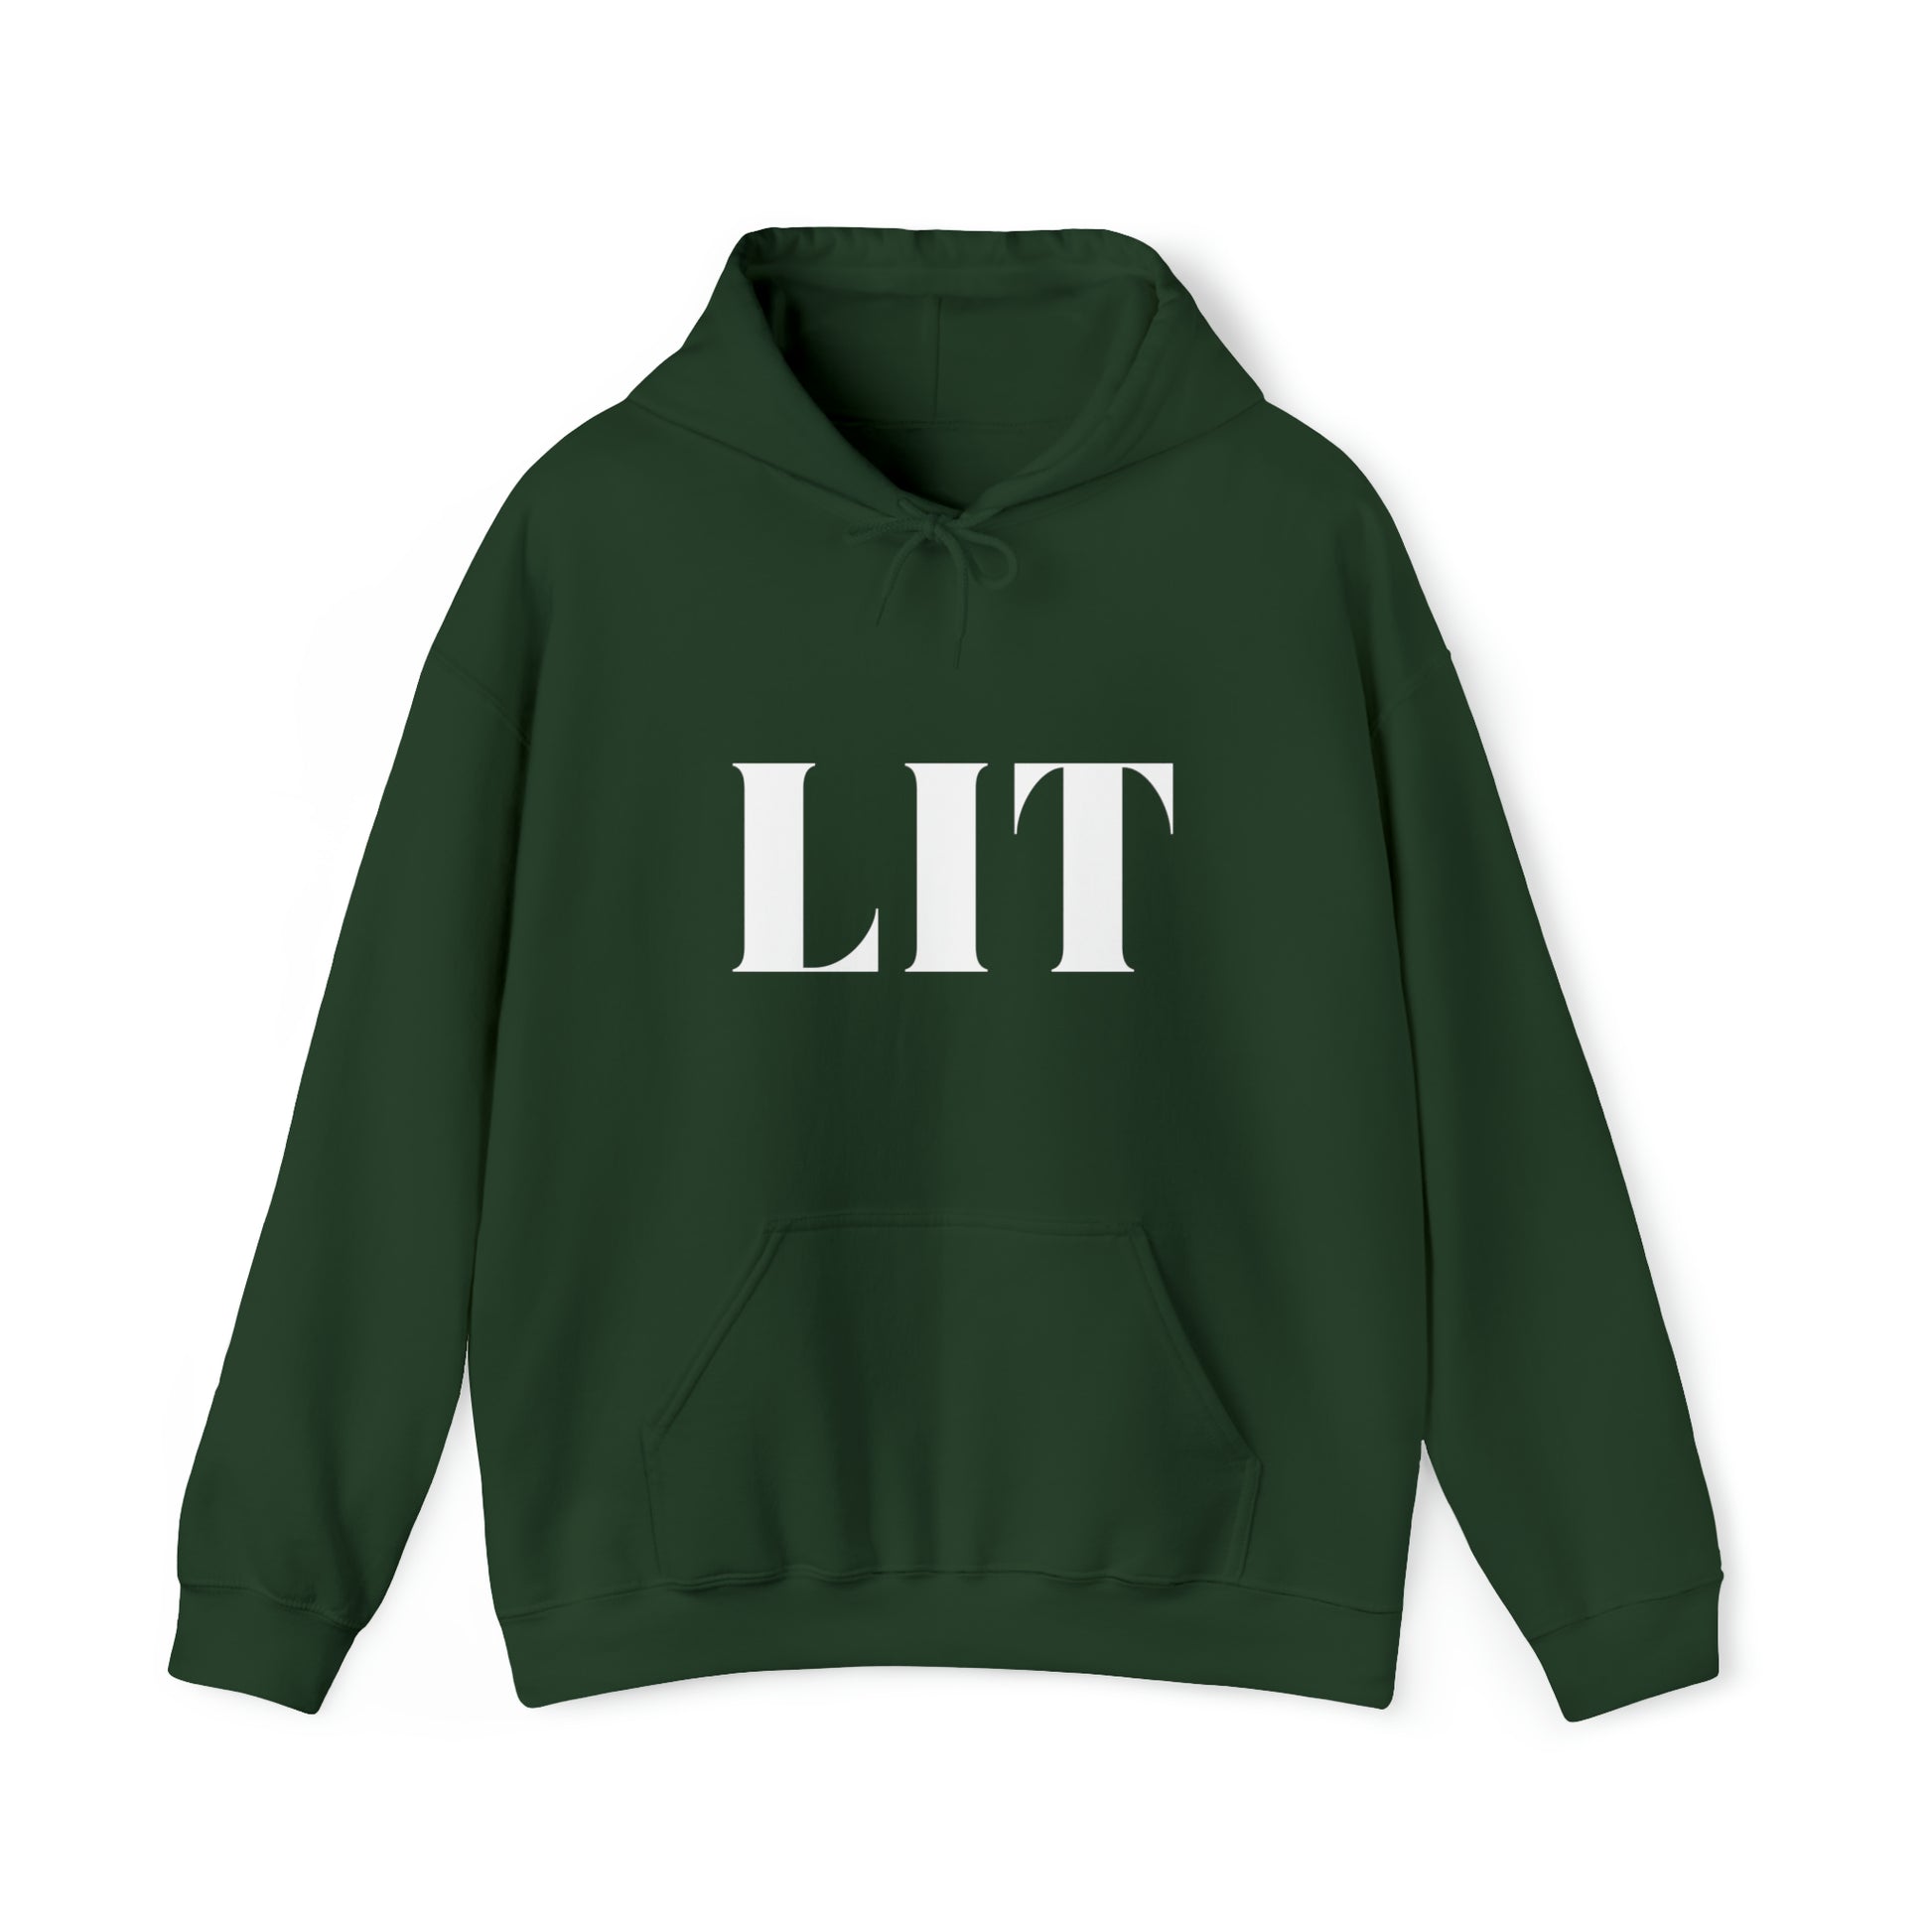 S Forest Green Lit Hoodie from HoodySZN.com